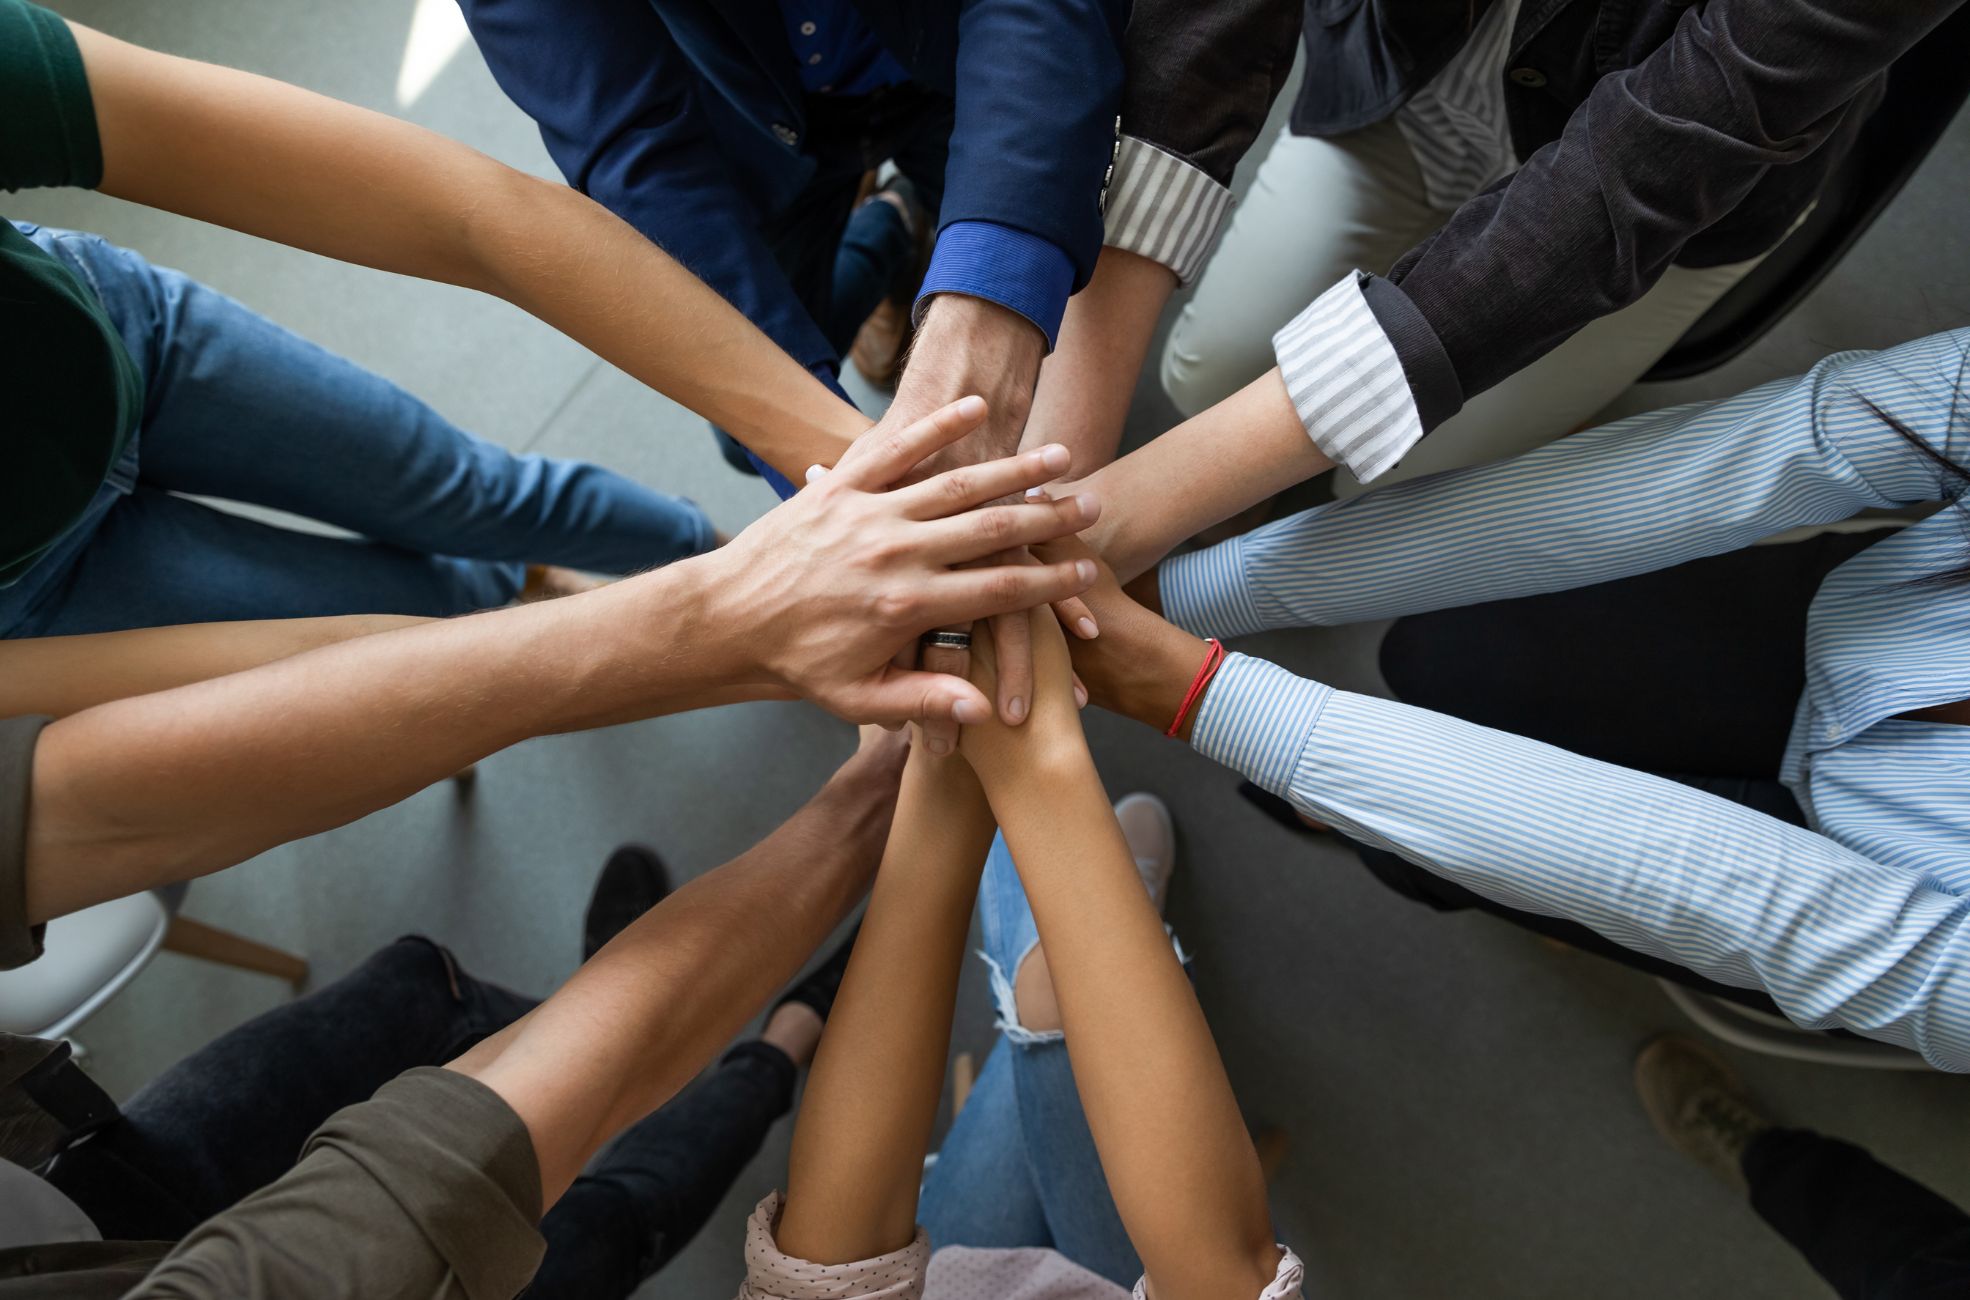 Stock Photo Showing Employee Engagement Through Hands